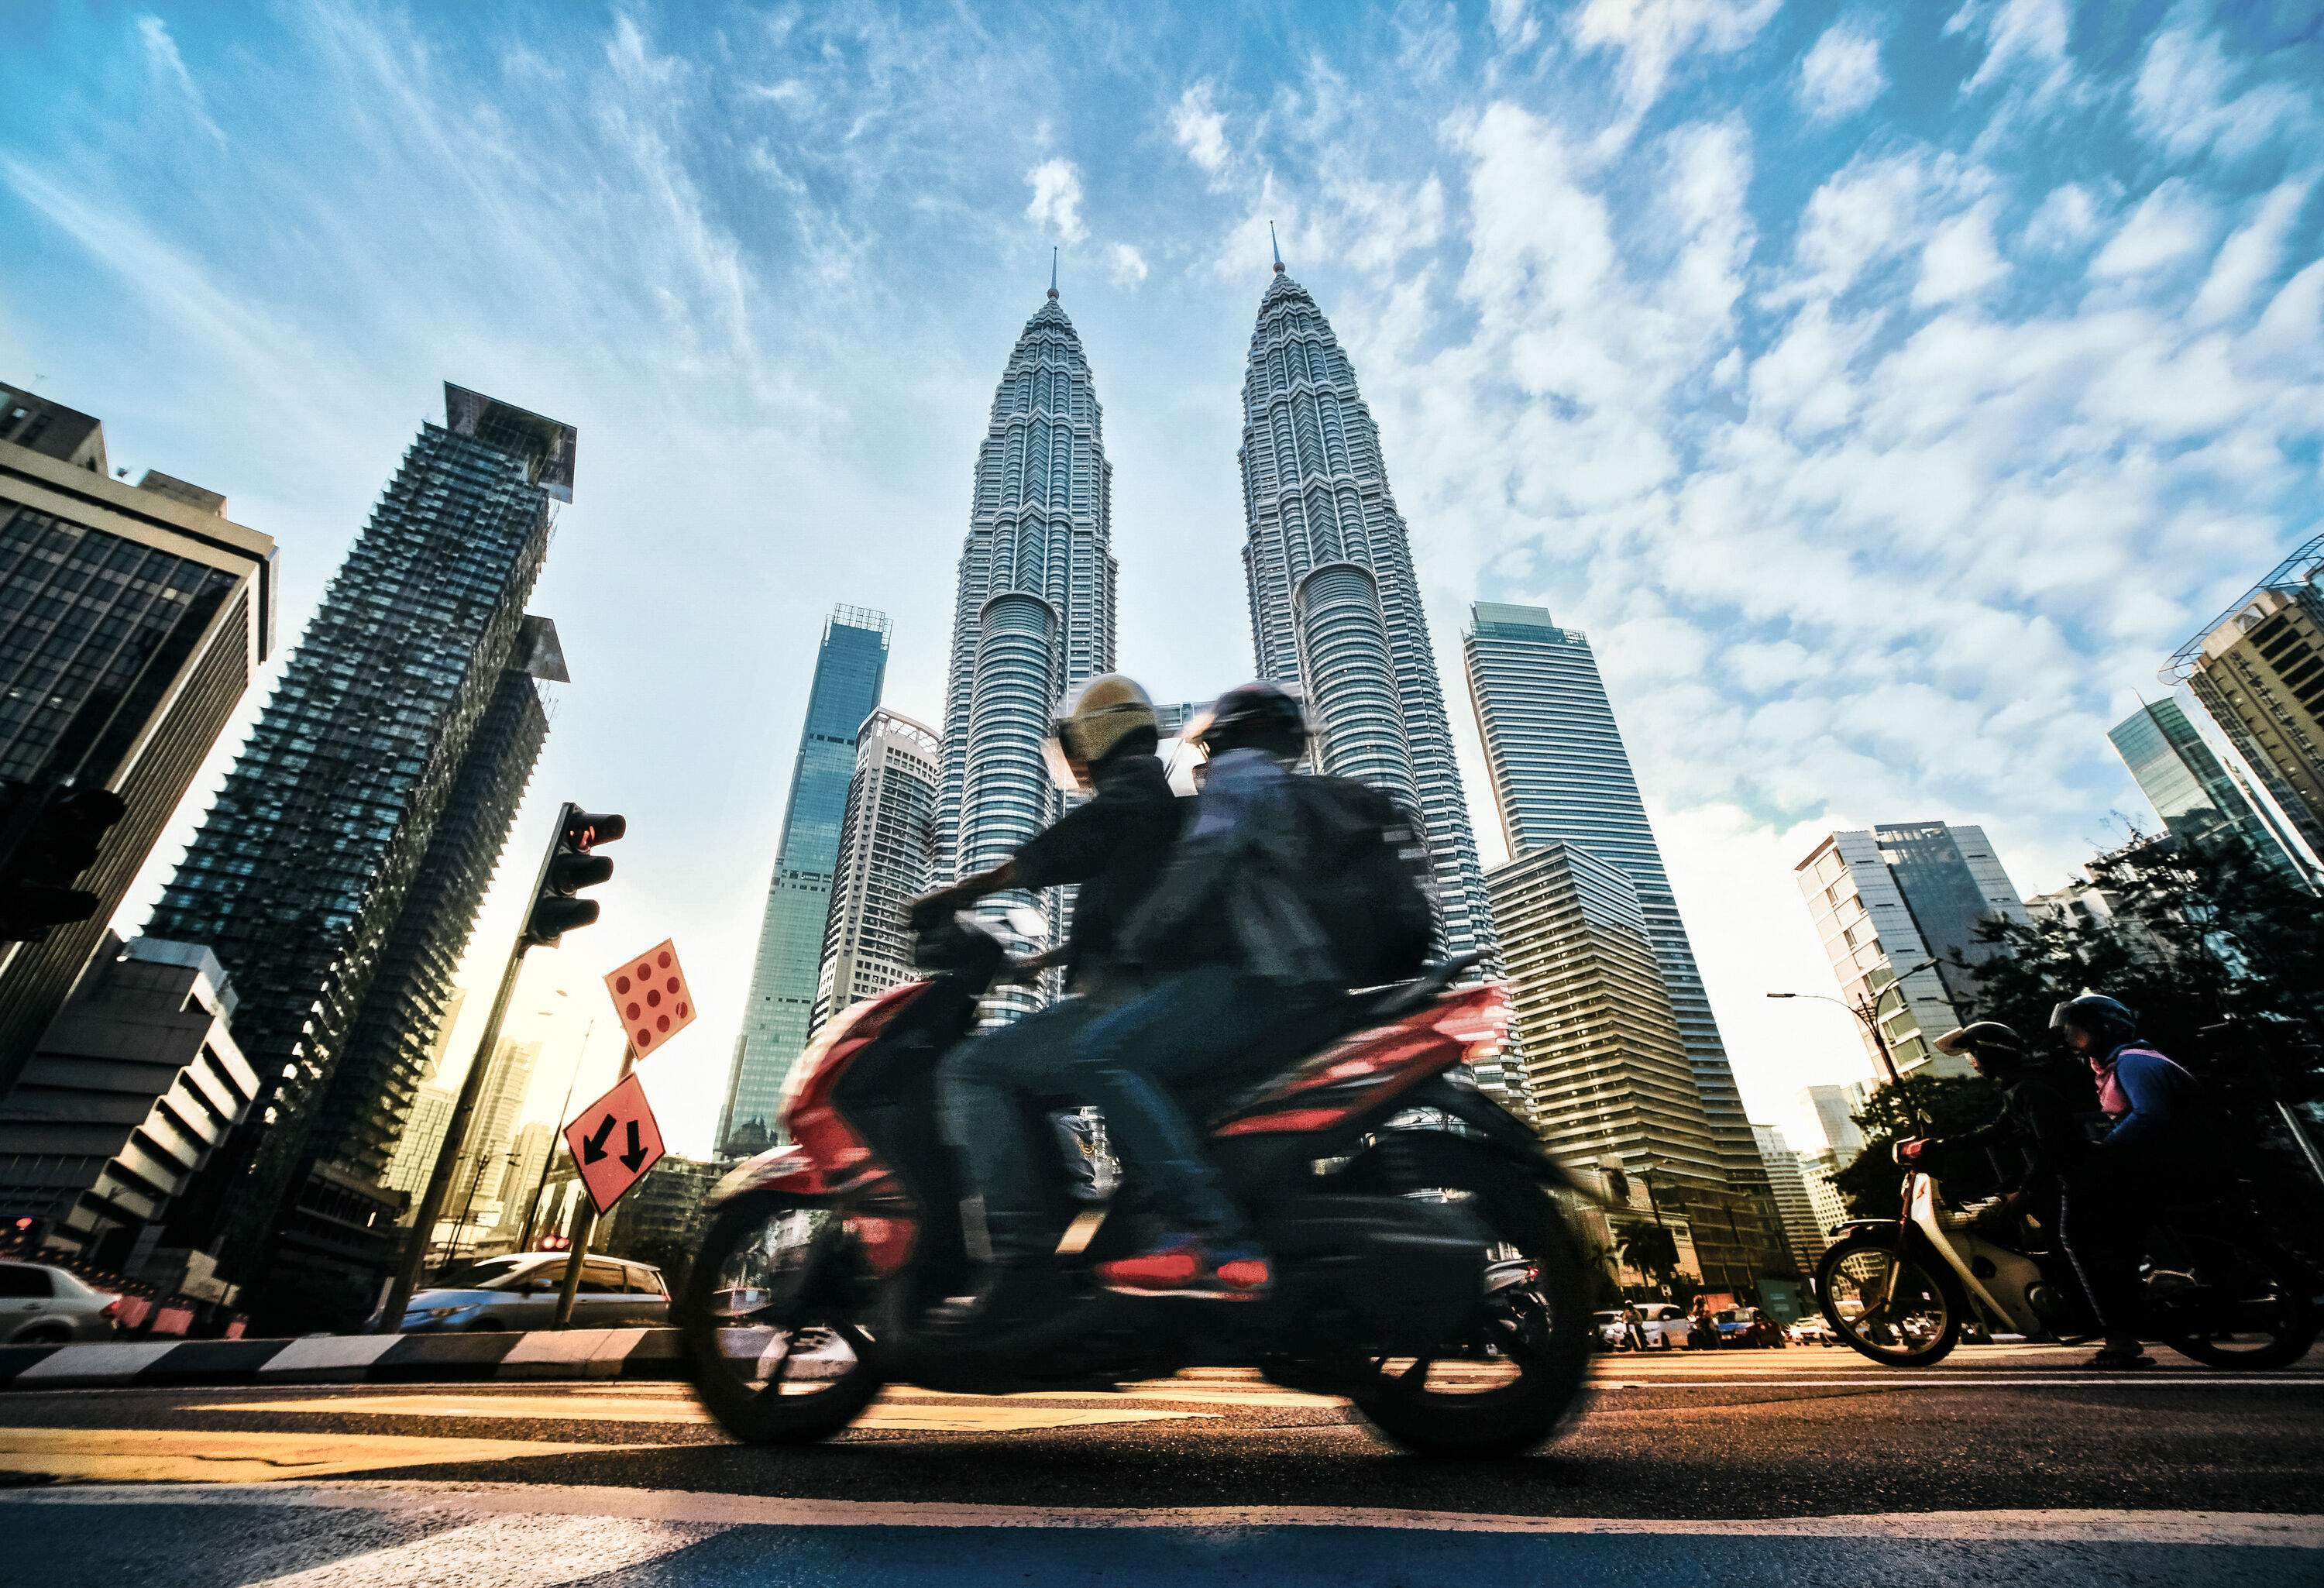 Motorists on a bustling street along the majestic Petronas Twin Towers between tall buildings.